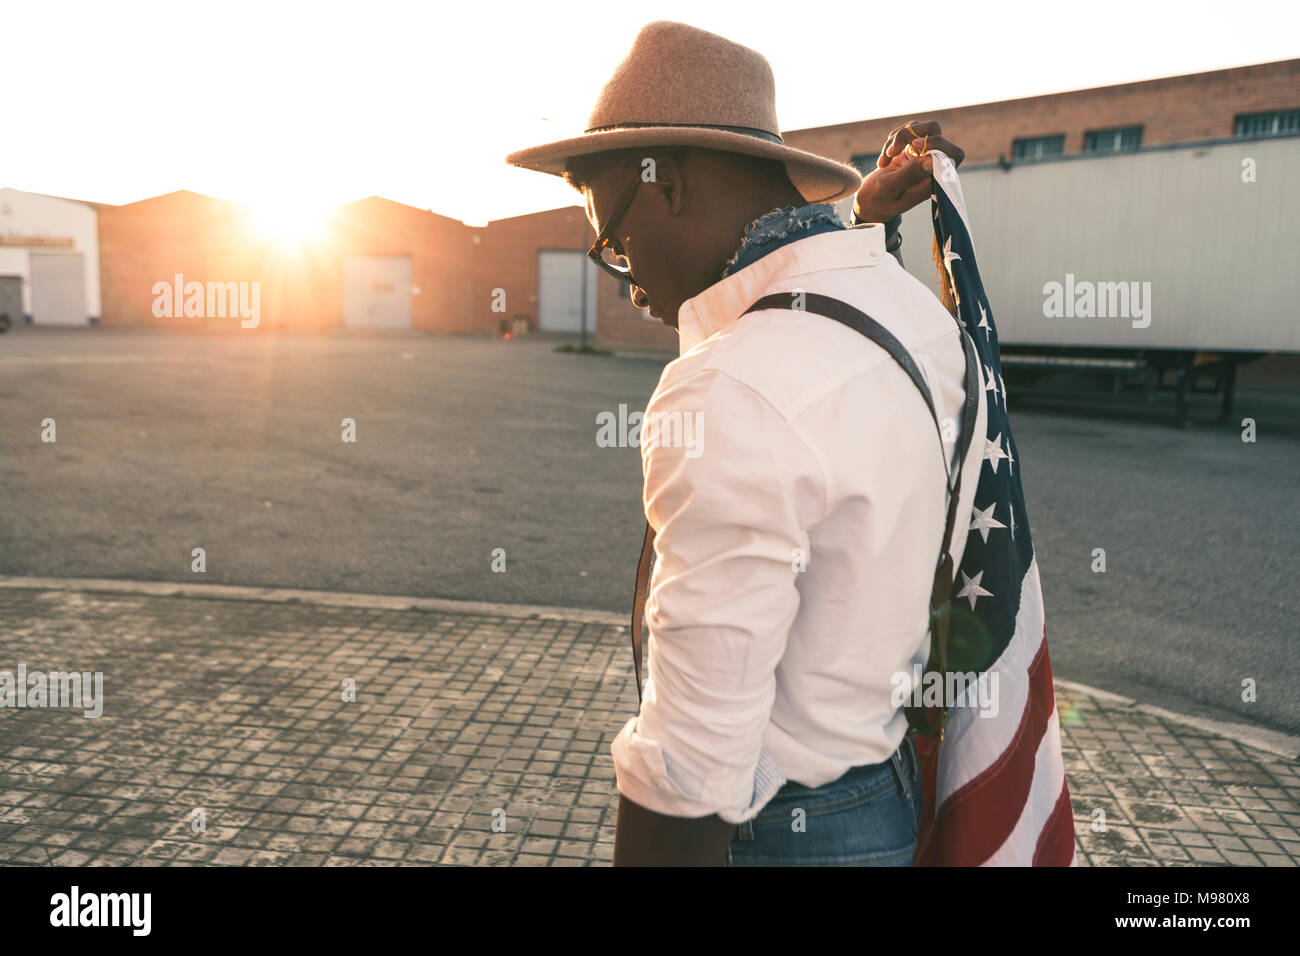 Young man wearing hat and sunglasses holding American flag Stock Photo